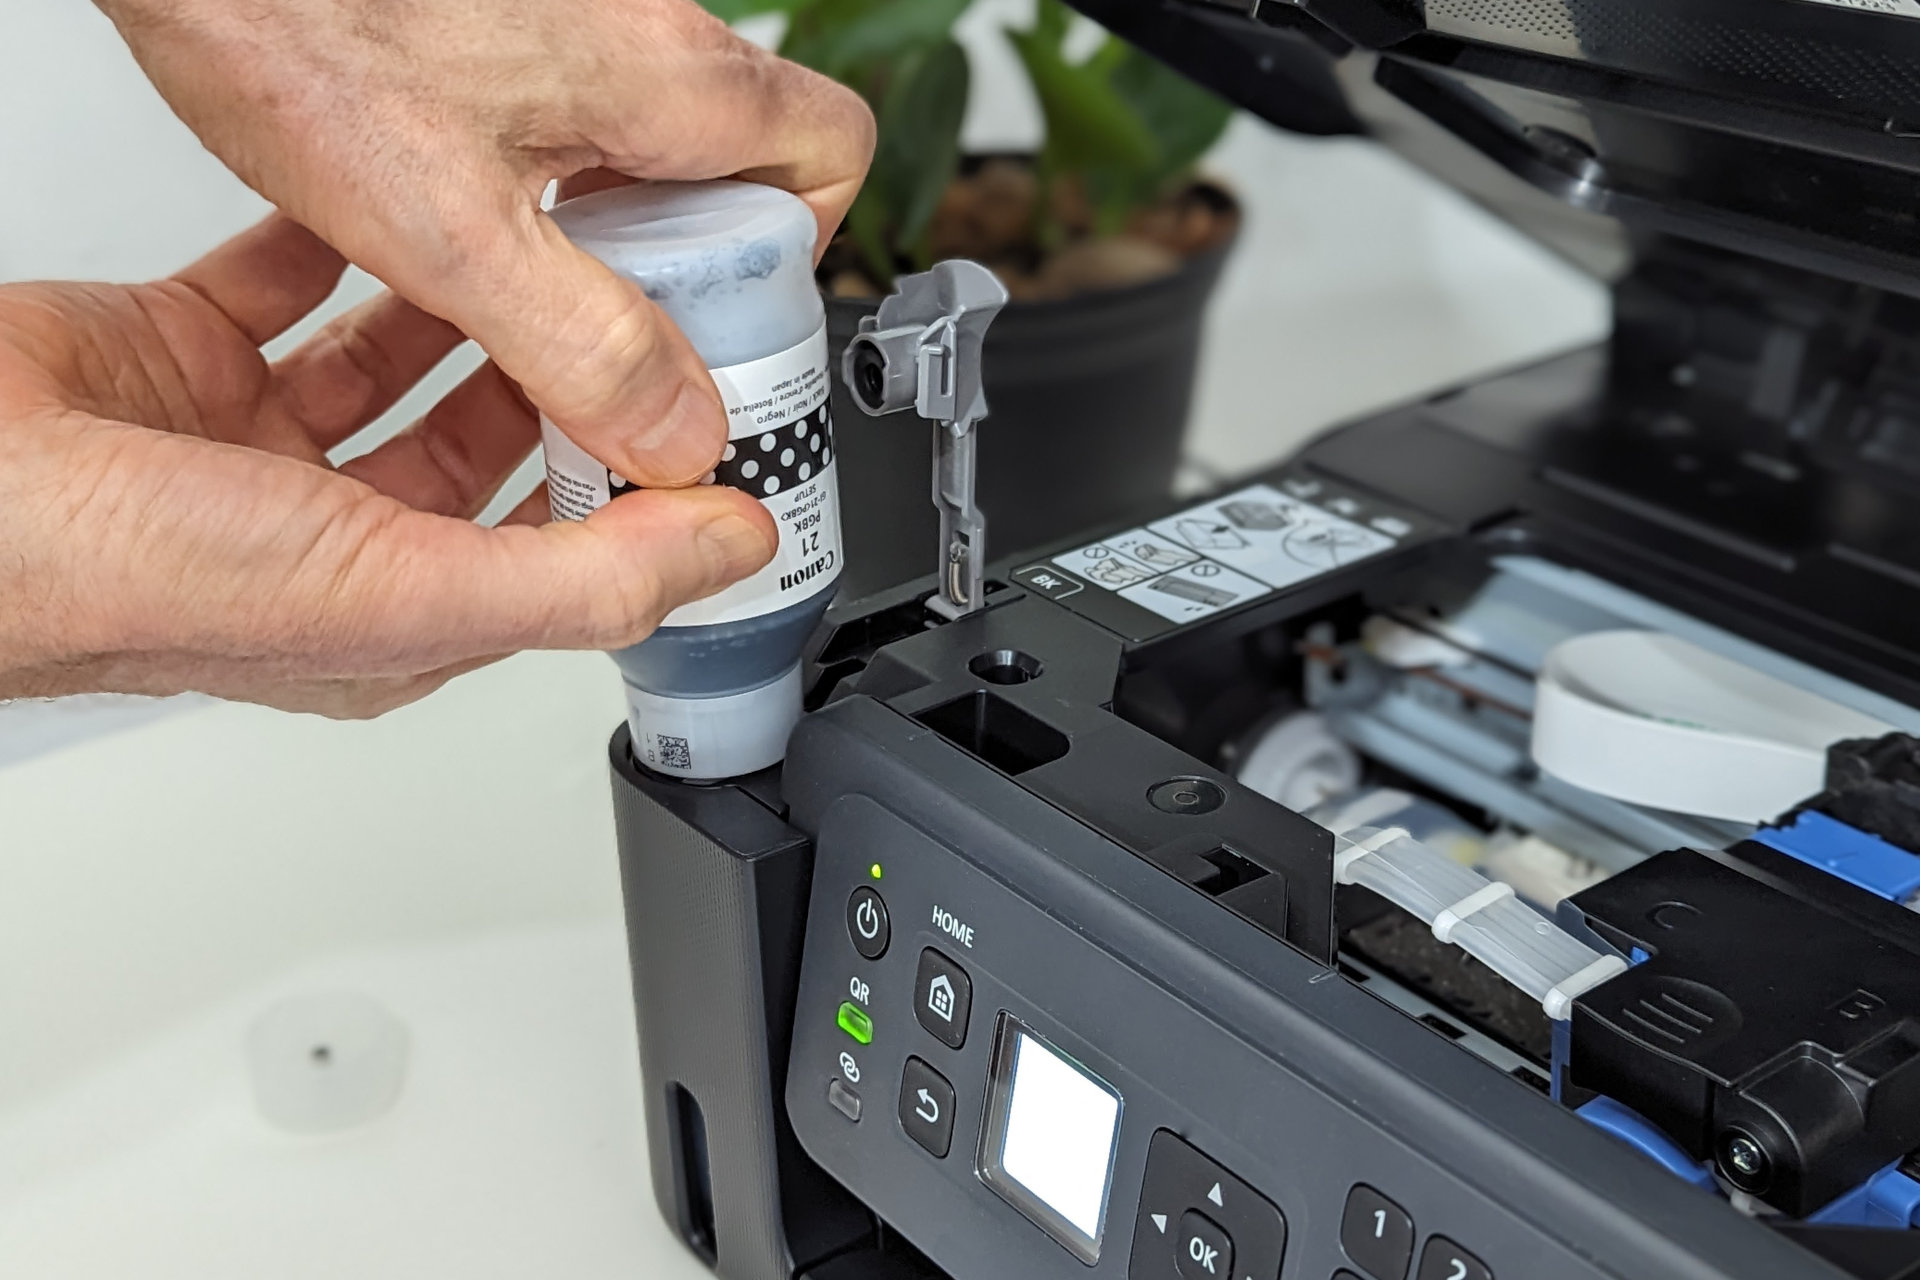 The instructions say squeeze the Pixma G4270 ink bottles, but you can't.